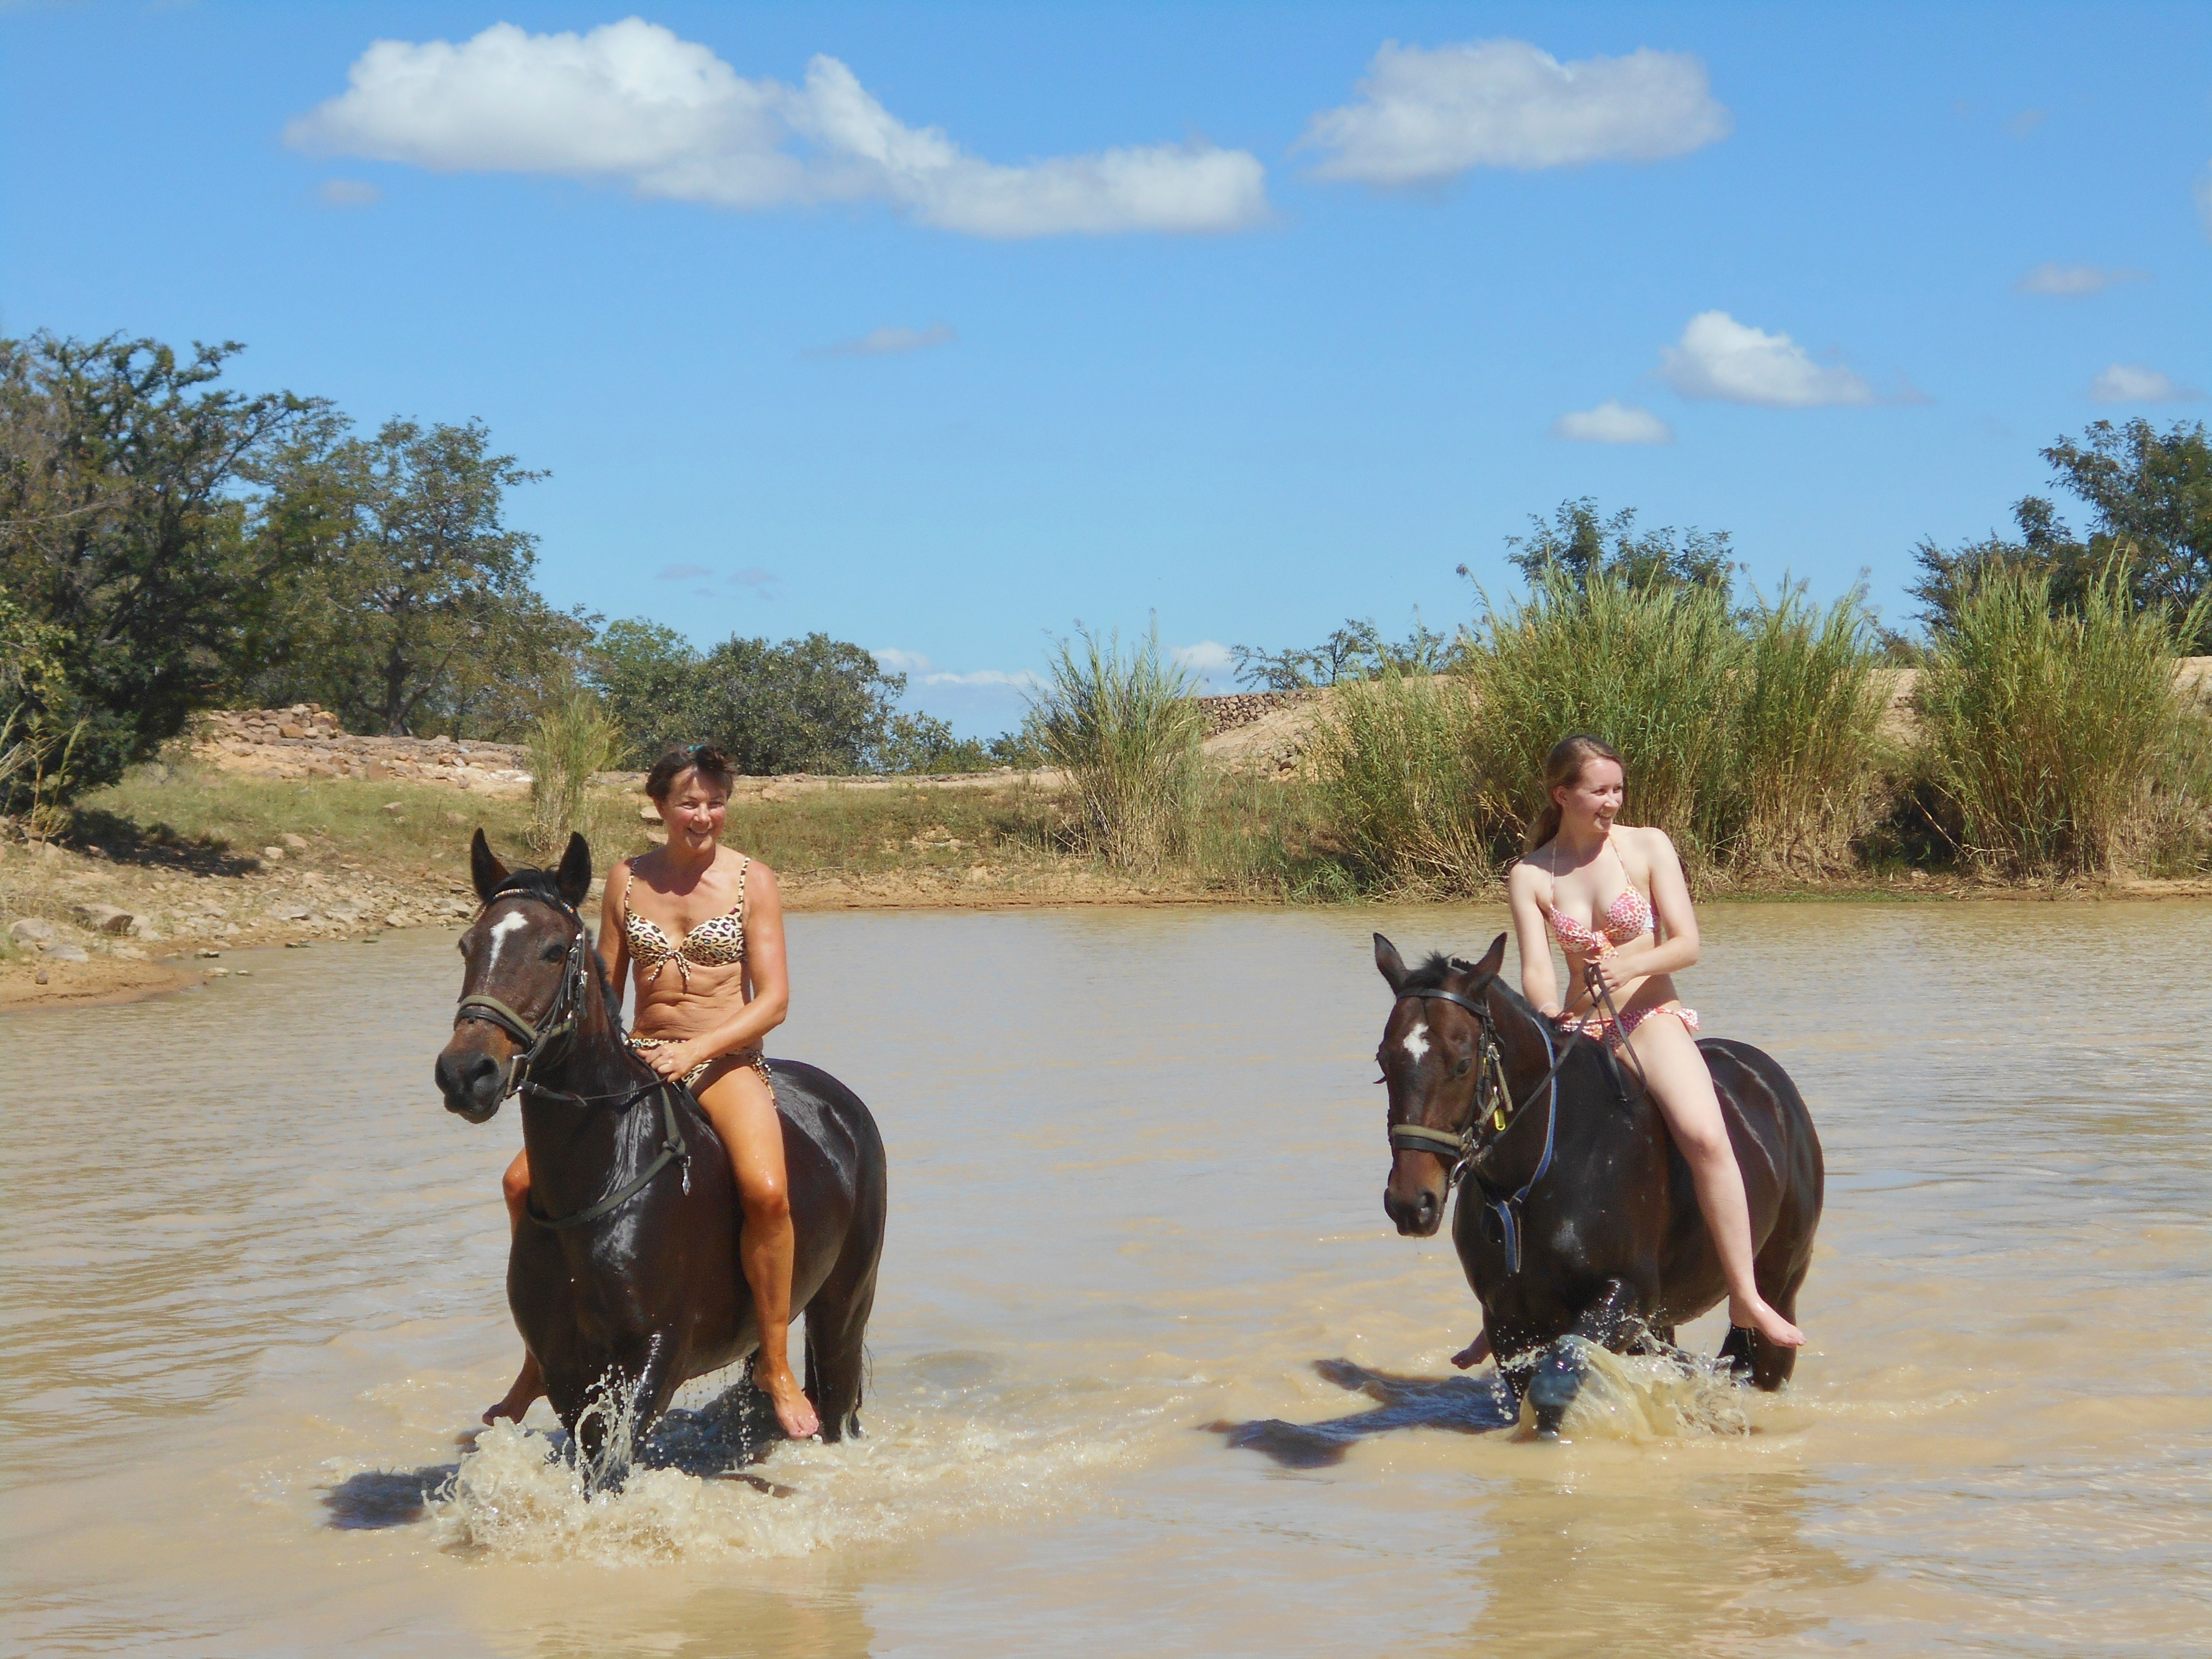 Fulfilling the dream of a lifetime - swimming in the dam with the horses